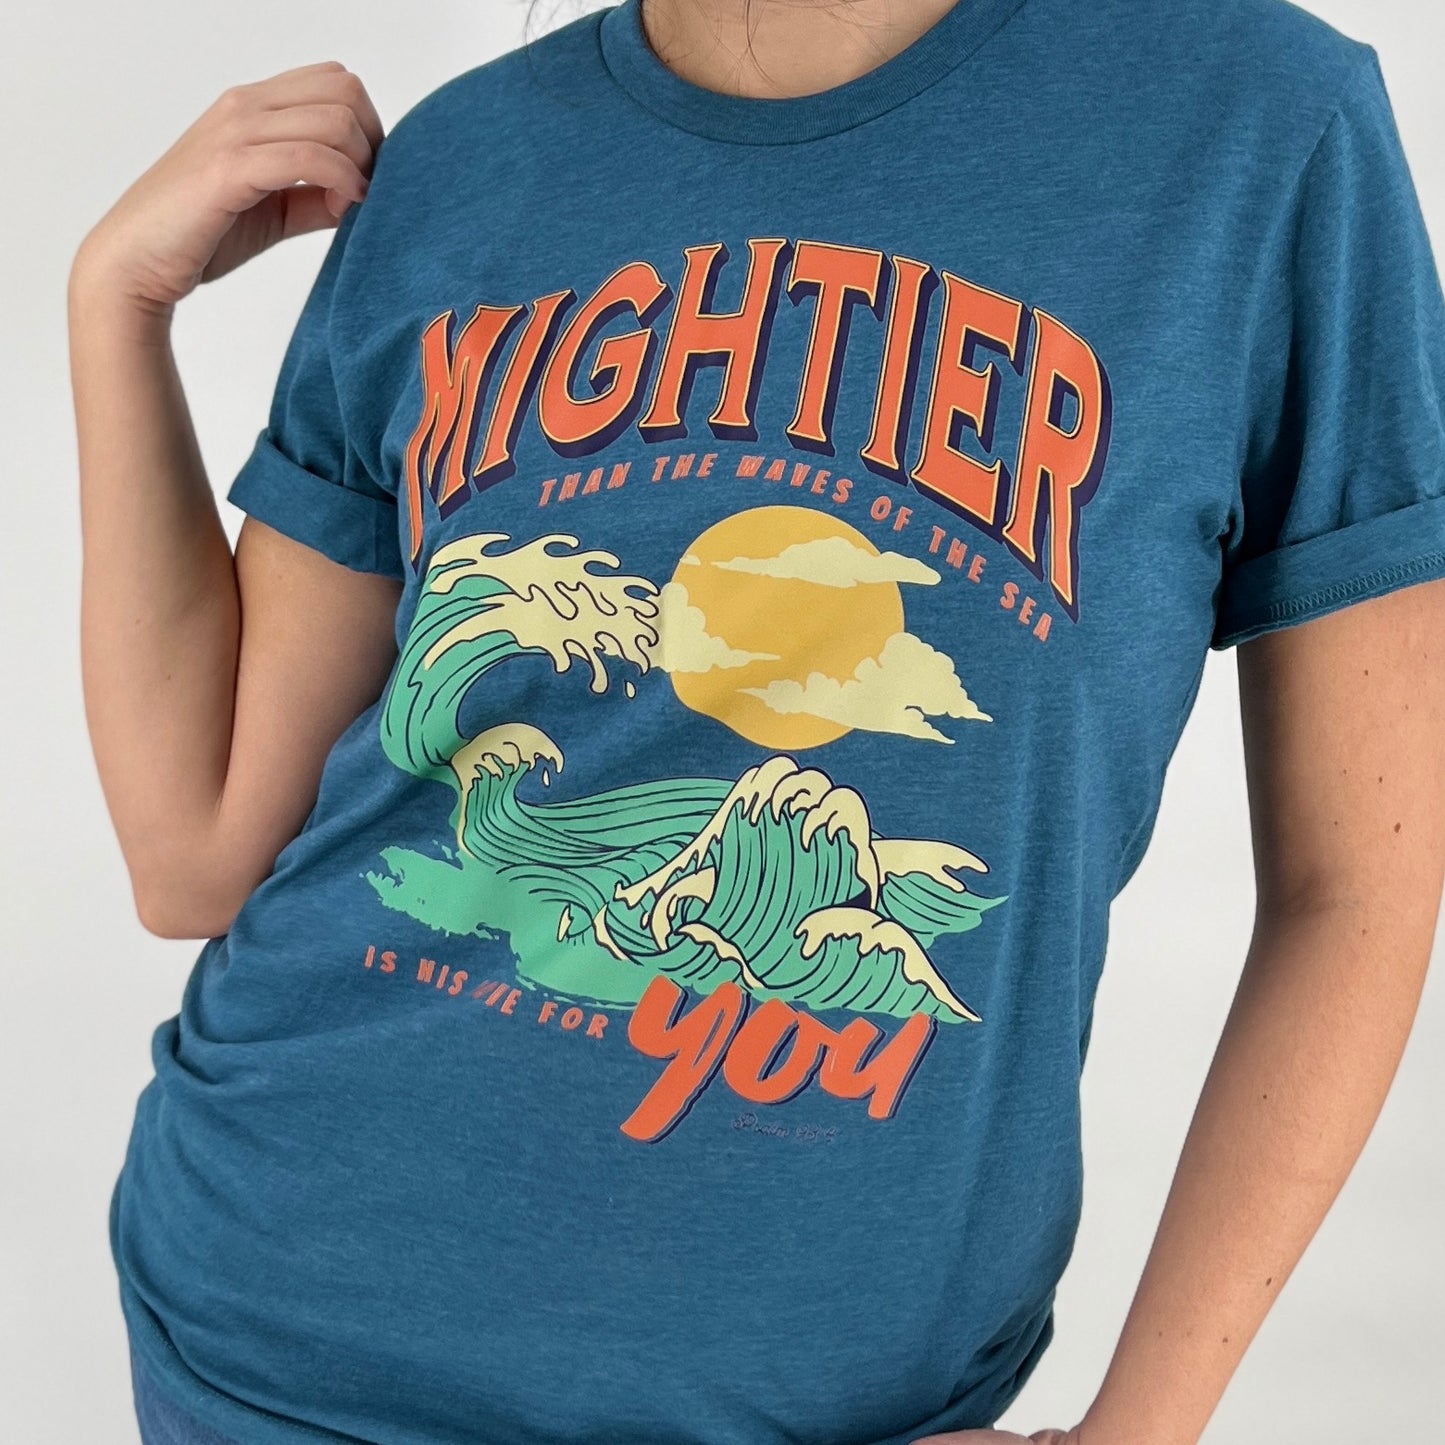 Mightier than the waves of the sea is his love for you tee